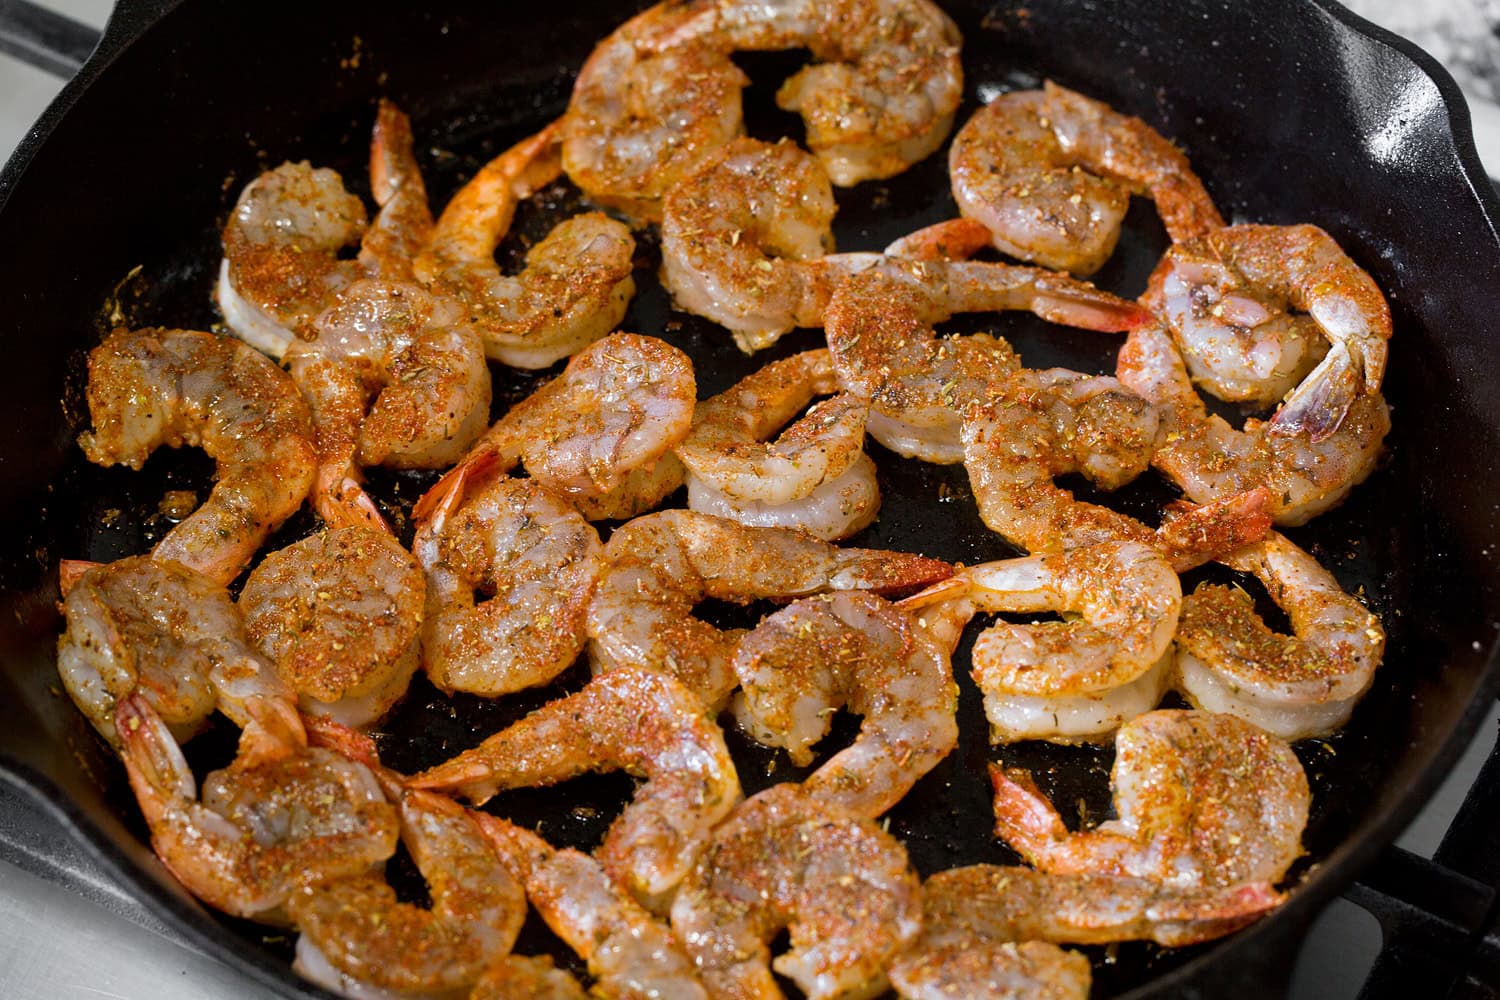 Blackened shrimp shown cooking in a cast iron skillet on the first side.